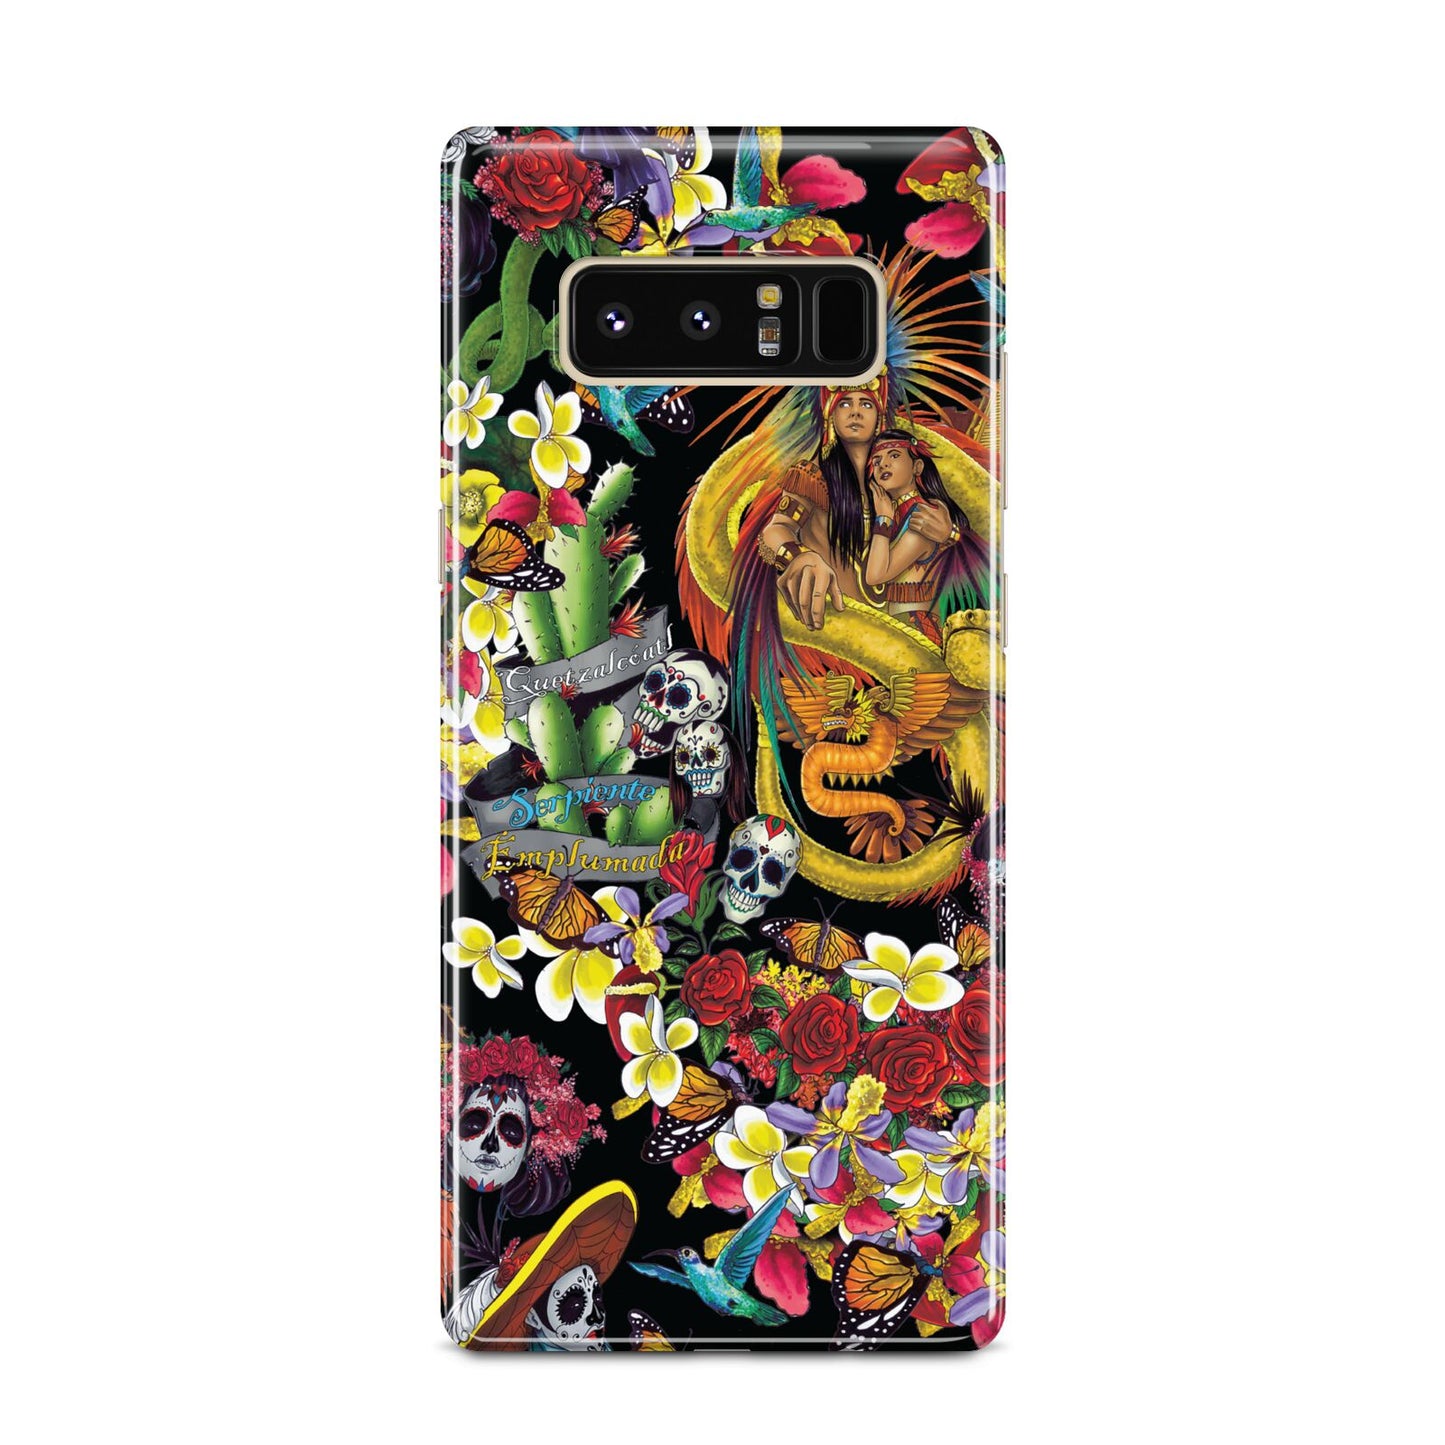 Day of the Dead Samsung Galaxy Note 8 Case